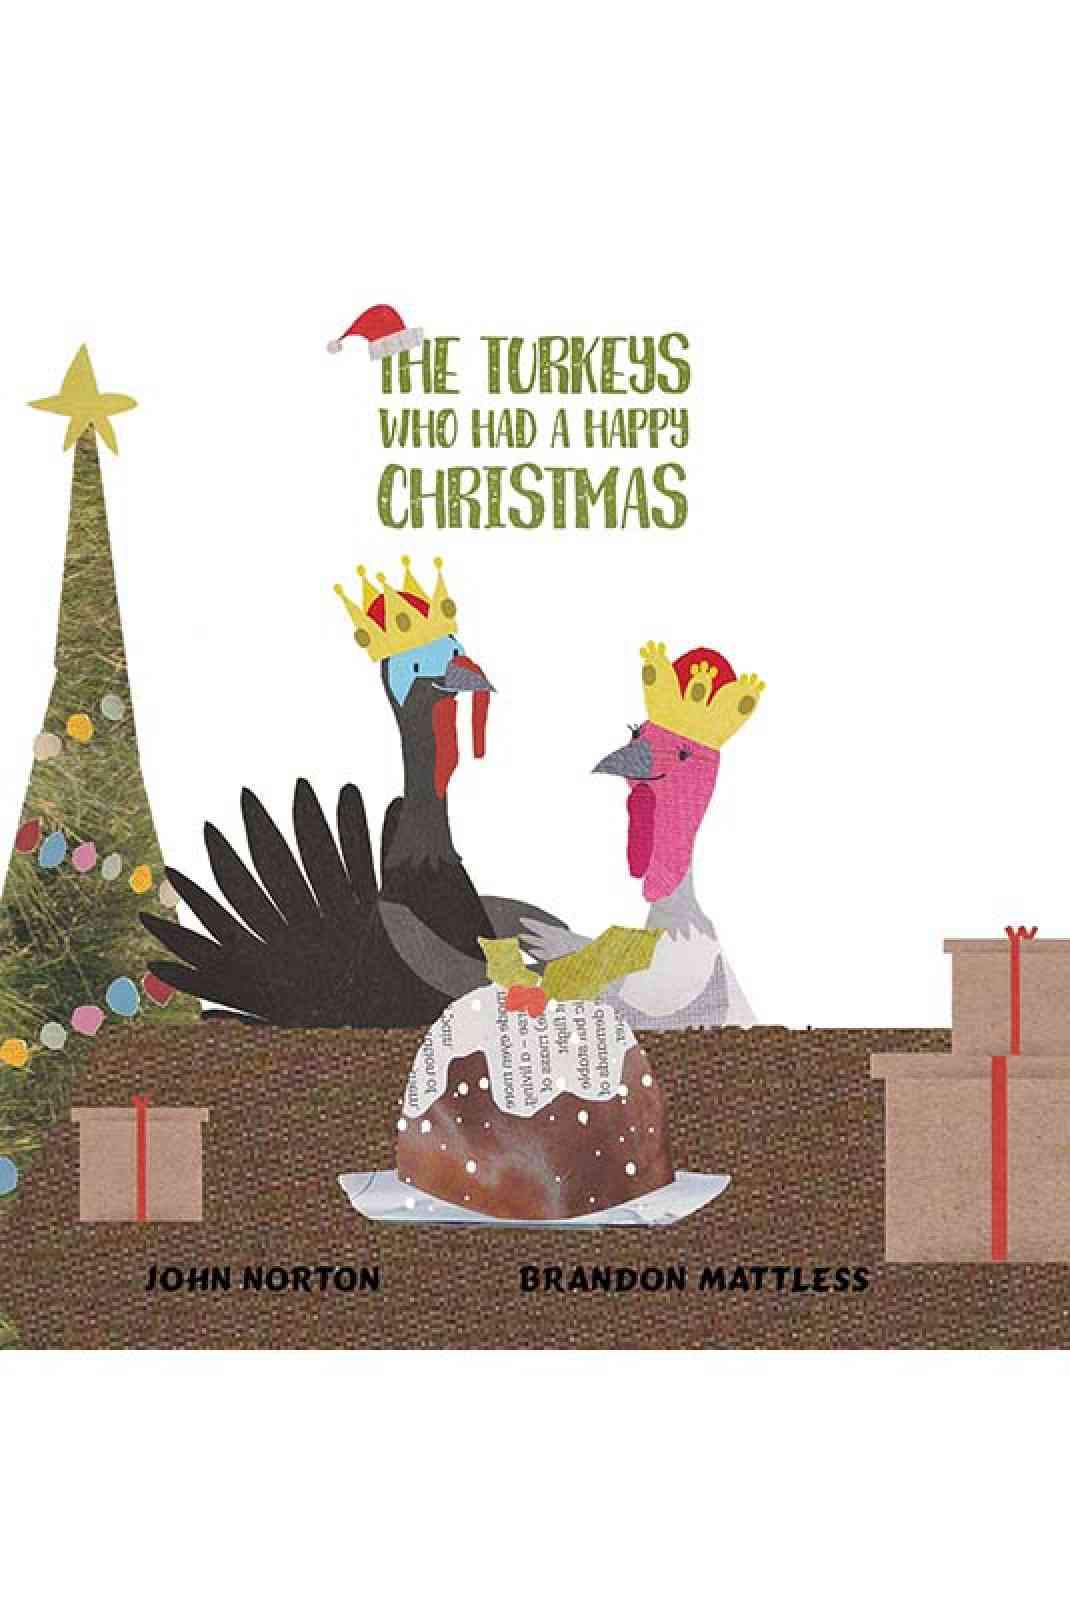 John Norton, the author of ‘The Turkeys Who Had a Happy Christmas’ was invited for a Radio Interview